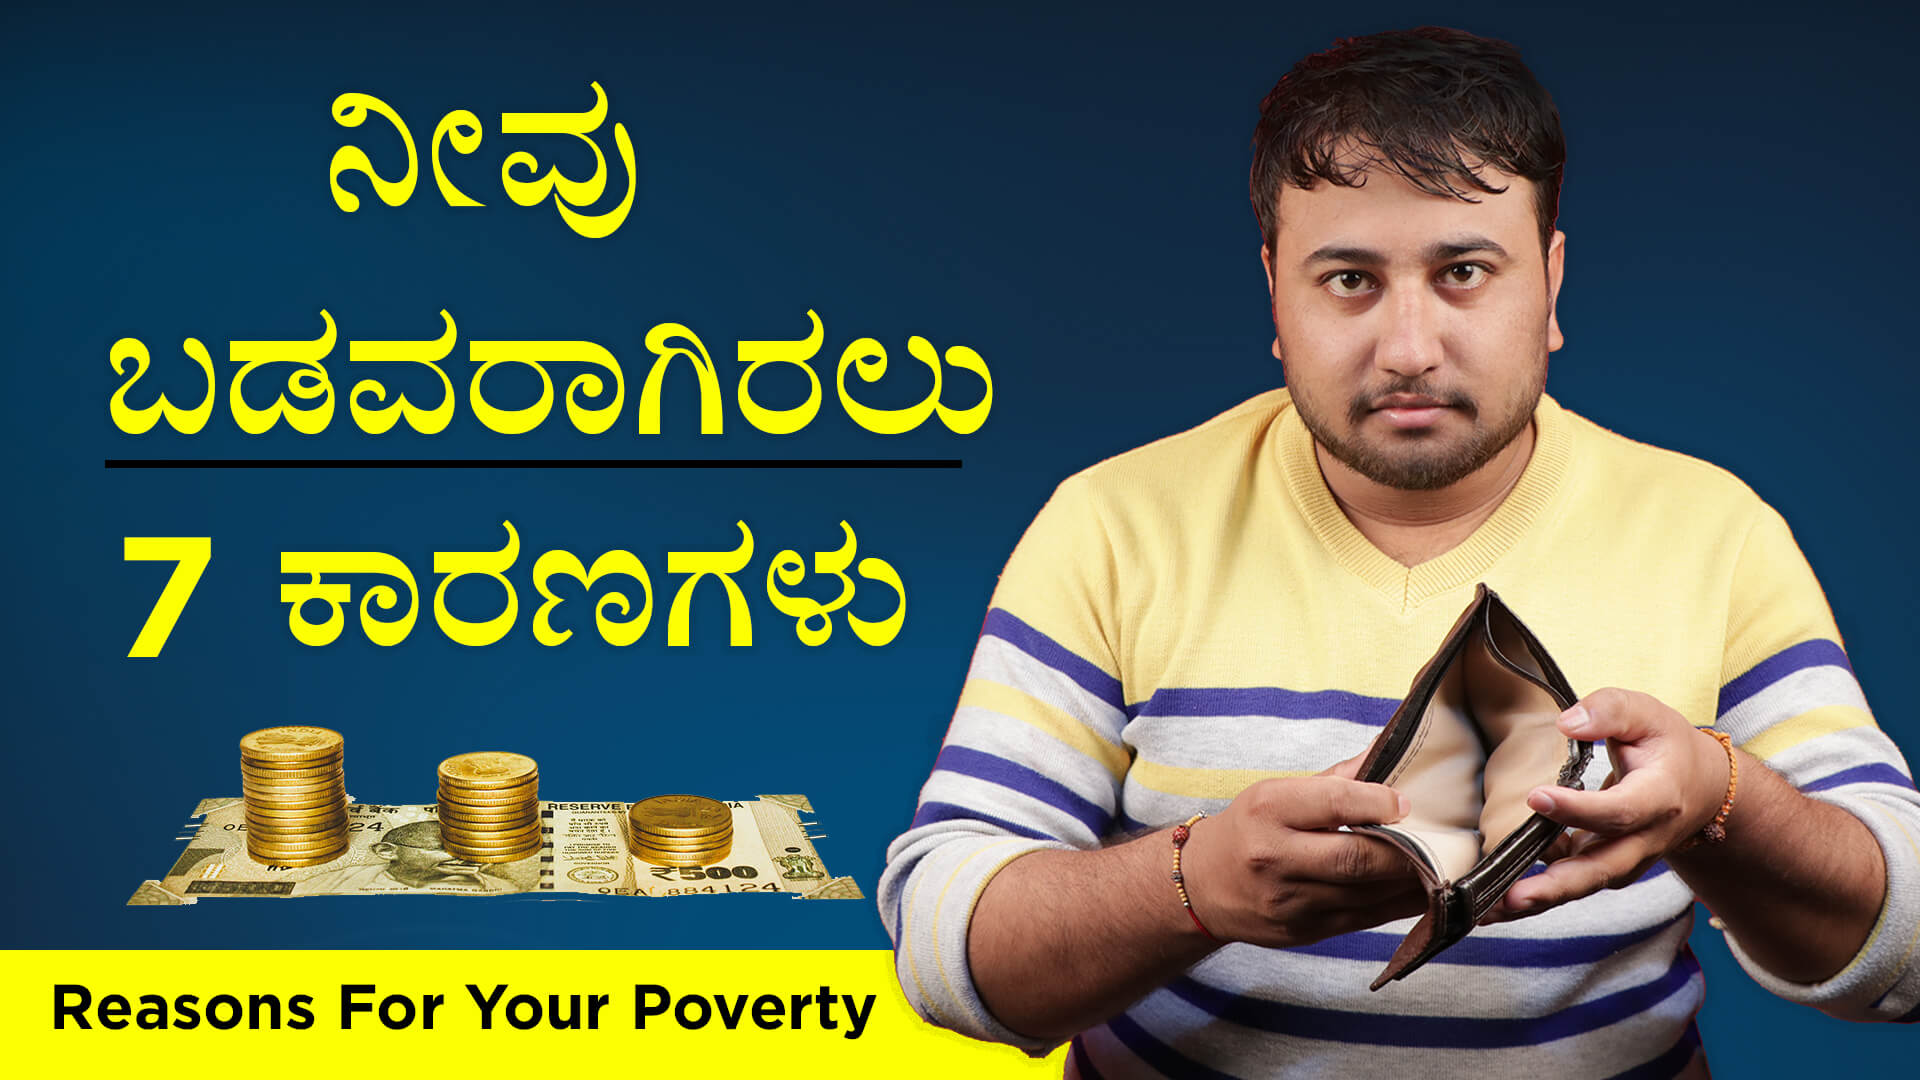 You are currently viewing ನೀವು ಬಡವರಾಗಿರಲು 7 ಕಾರಣಗಳು : Reasons for your poverty in Kannada – Life Changing Tips in Kannada